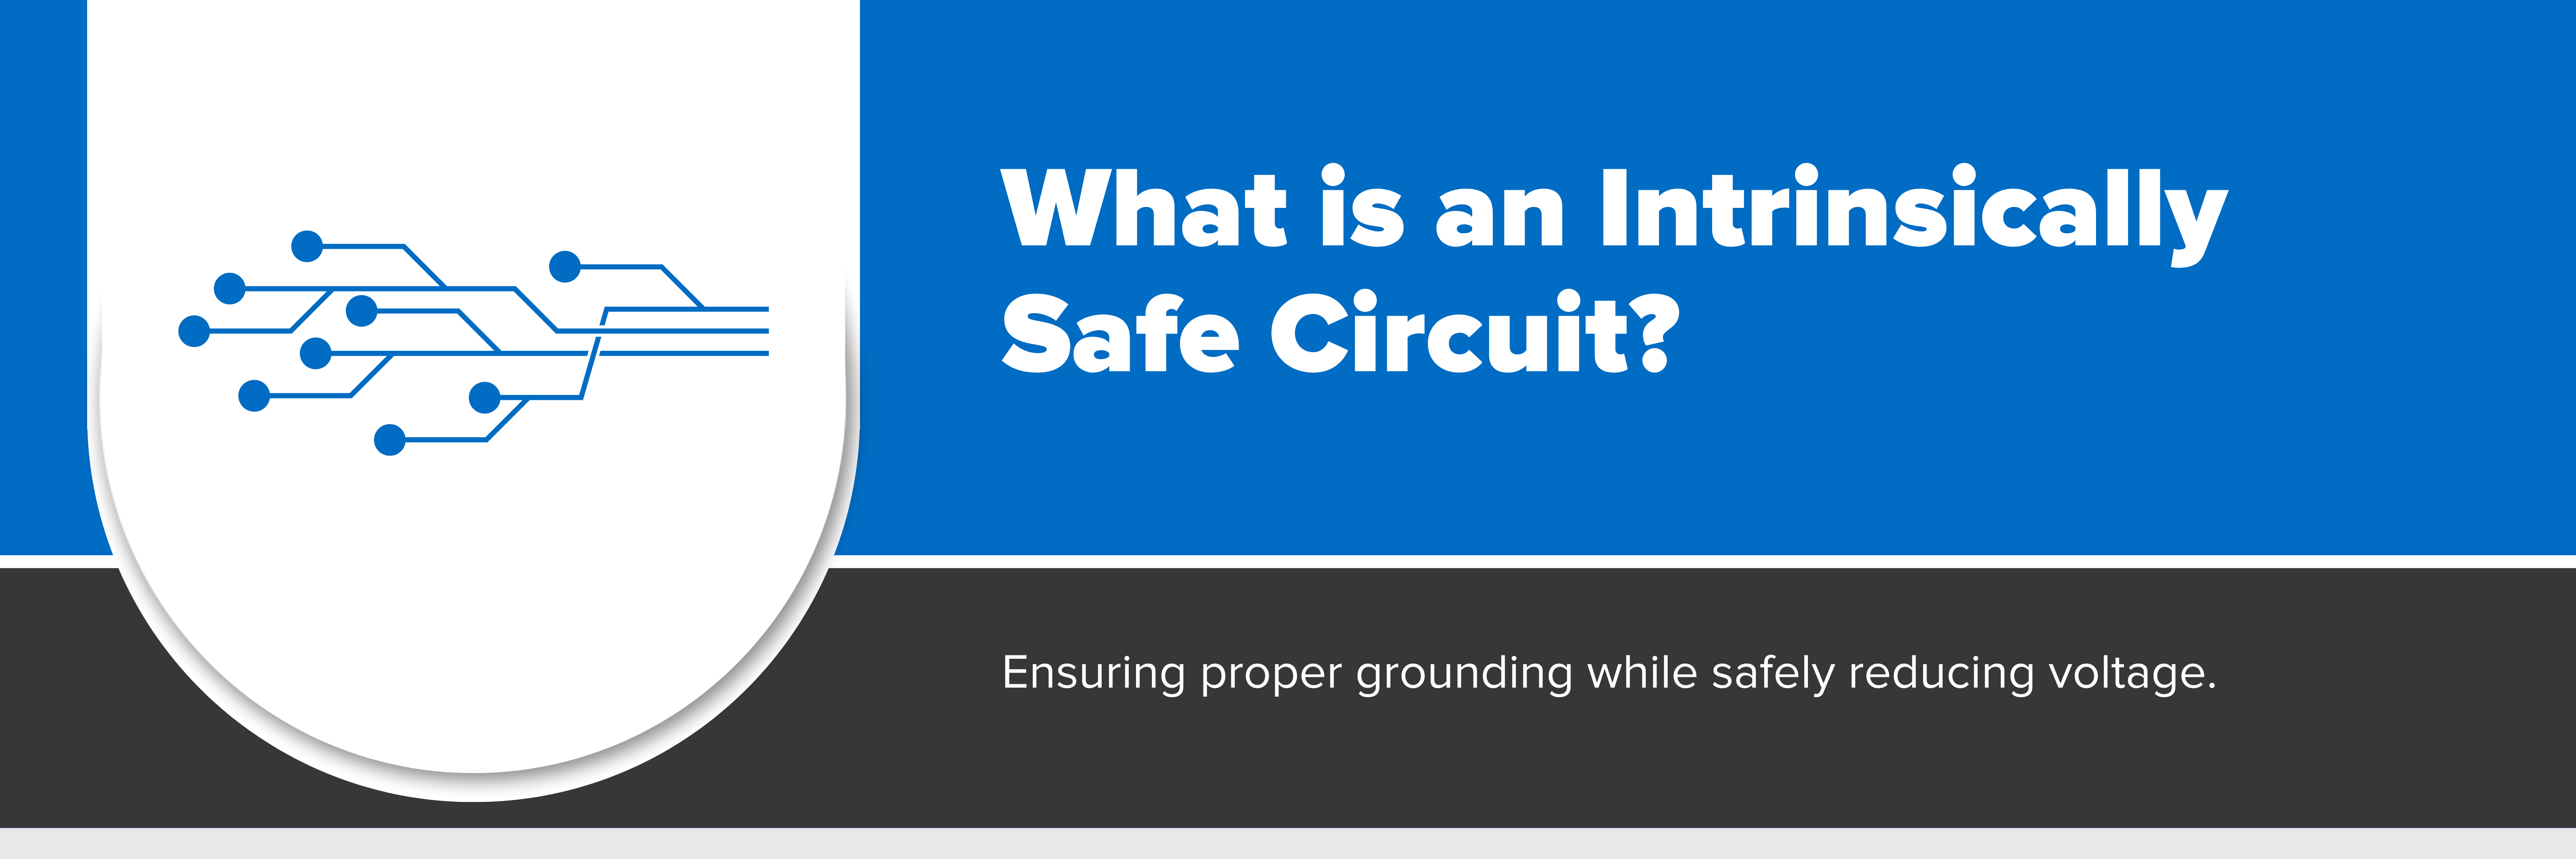 Header image with text "What is an Intrinsically Safe Circuit?"